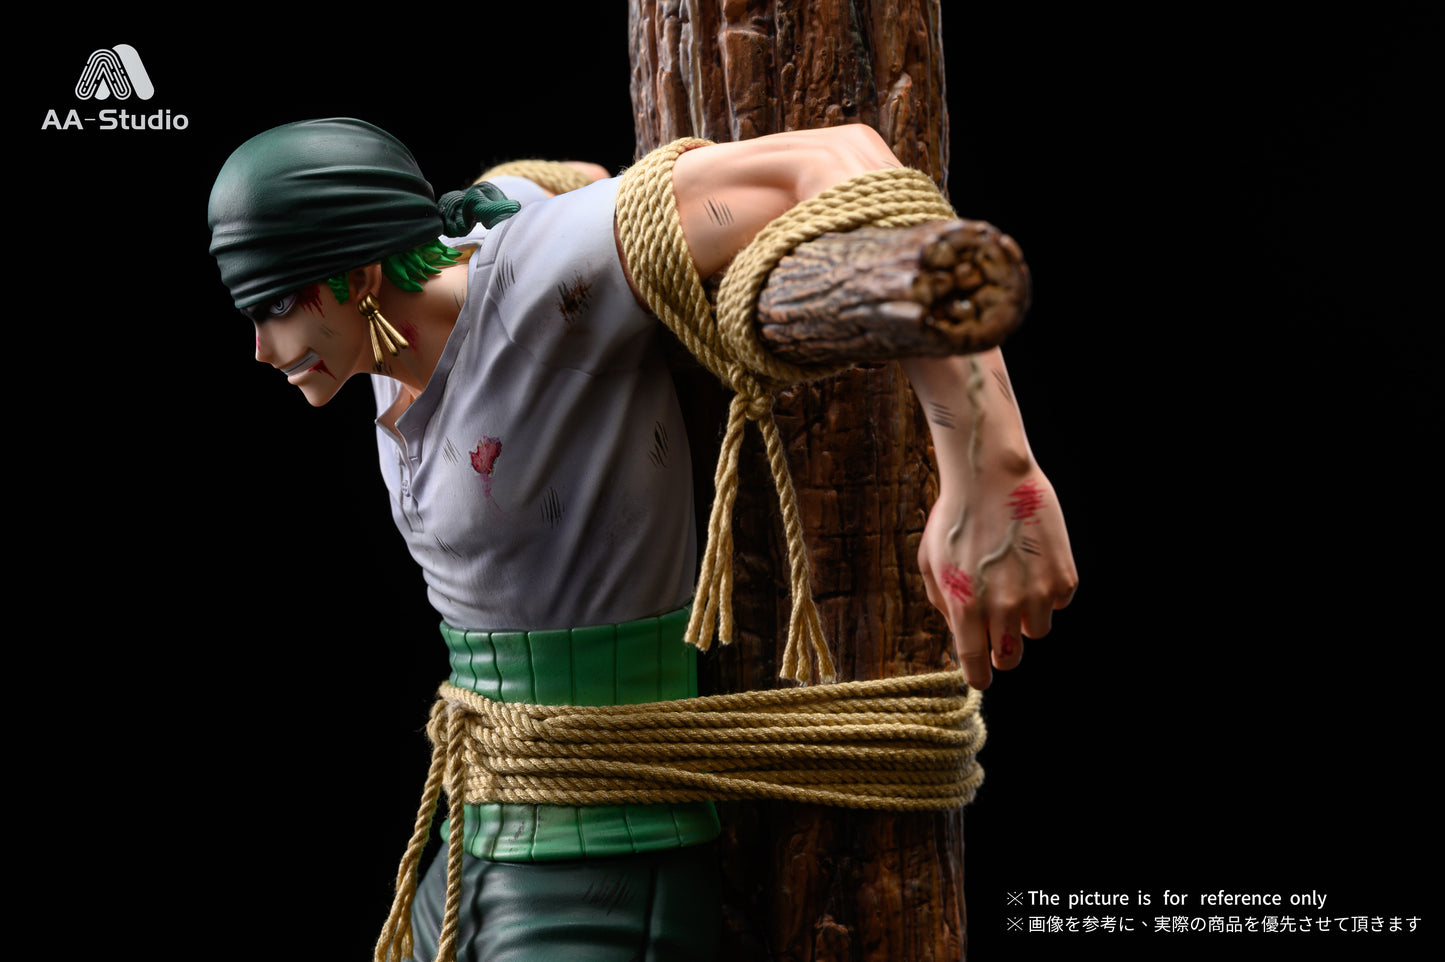 AA STUDIO – ONE PIECE: DEBUT SERIES 1. “PIRATE HUNTER” ZORO [SOLD OUT]